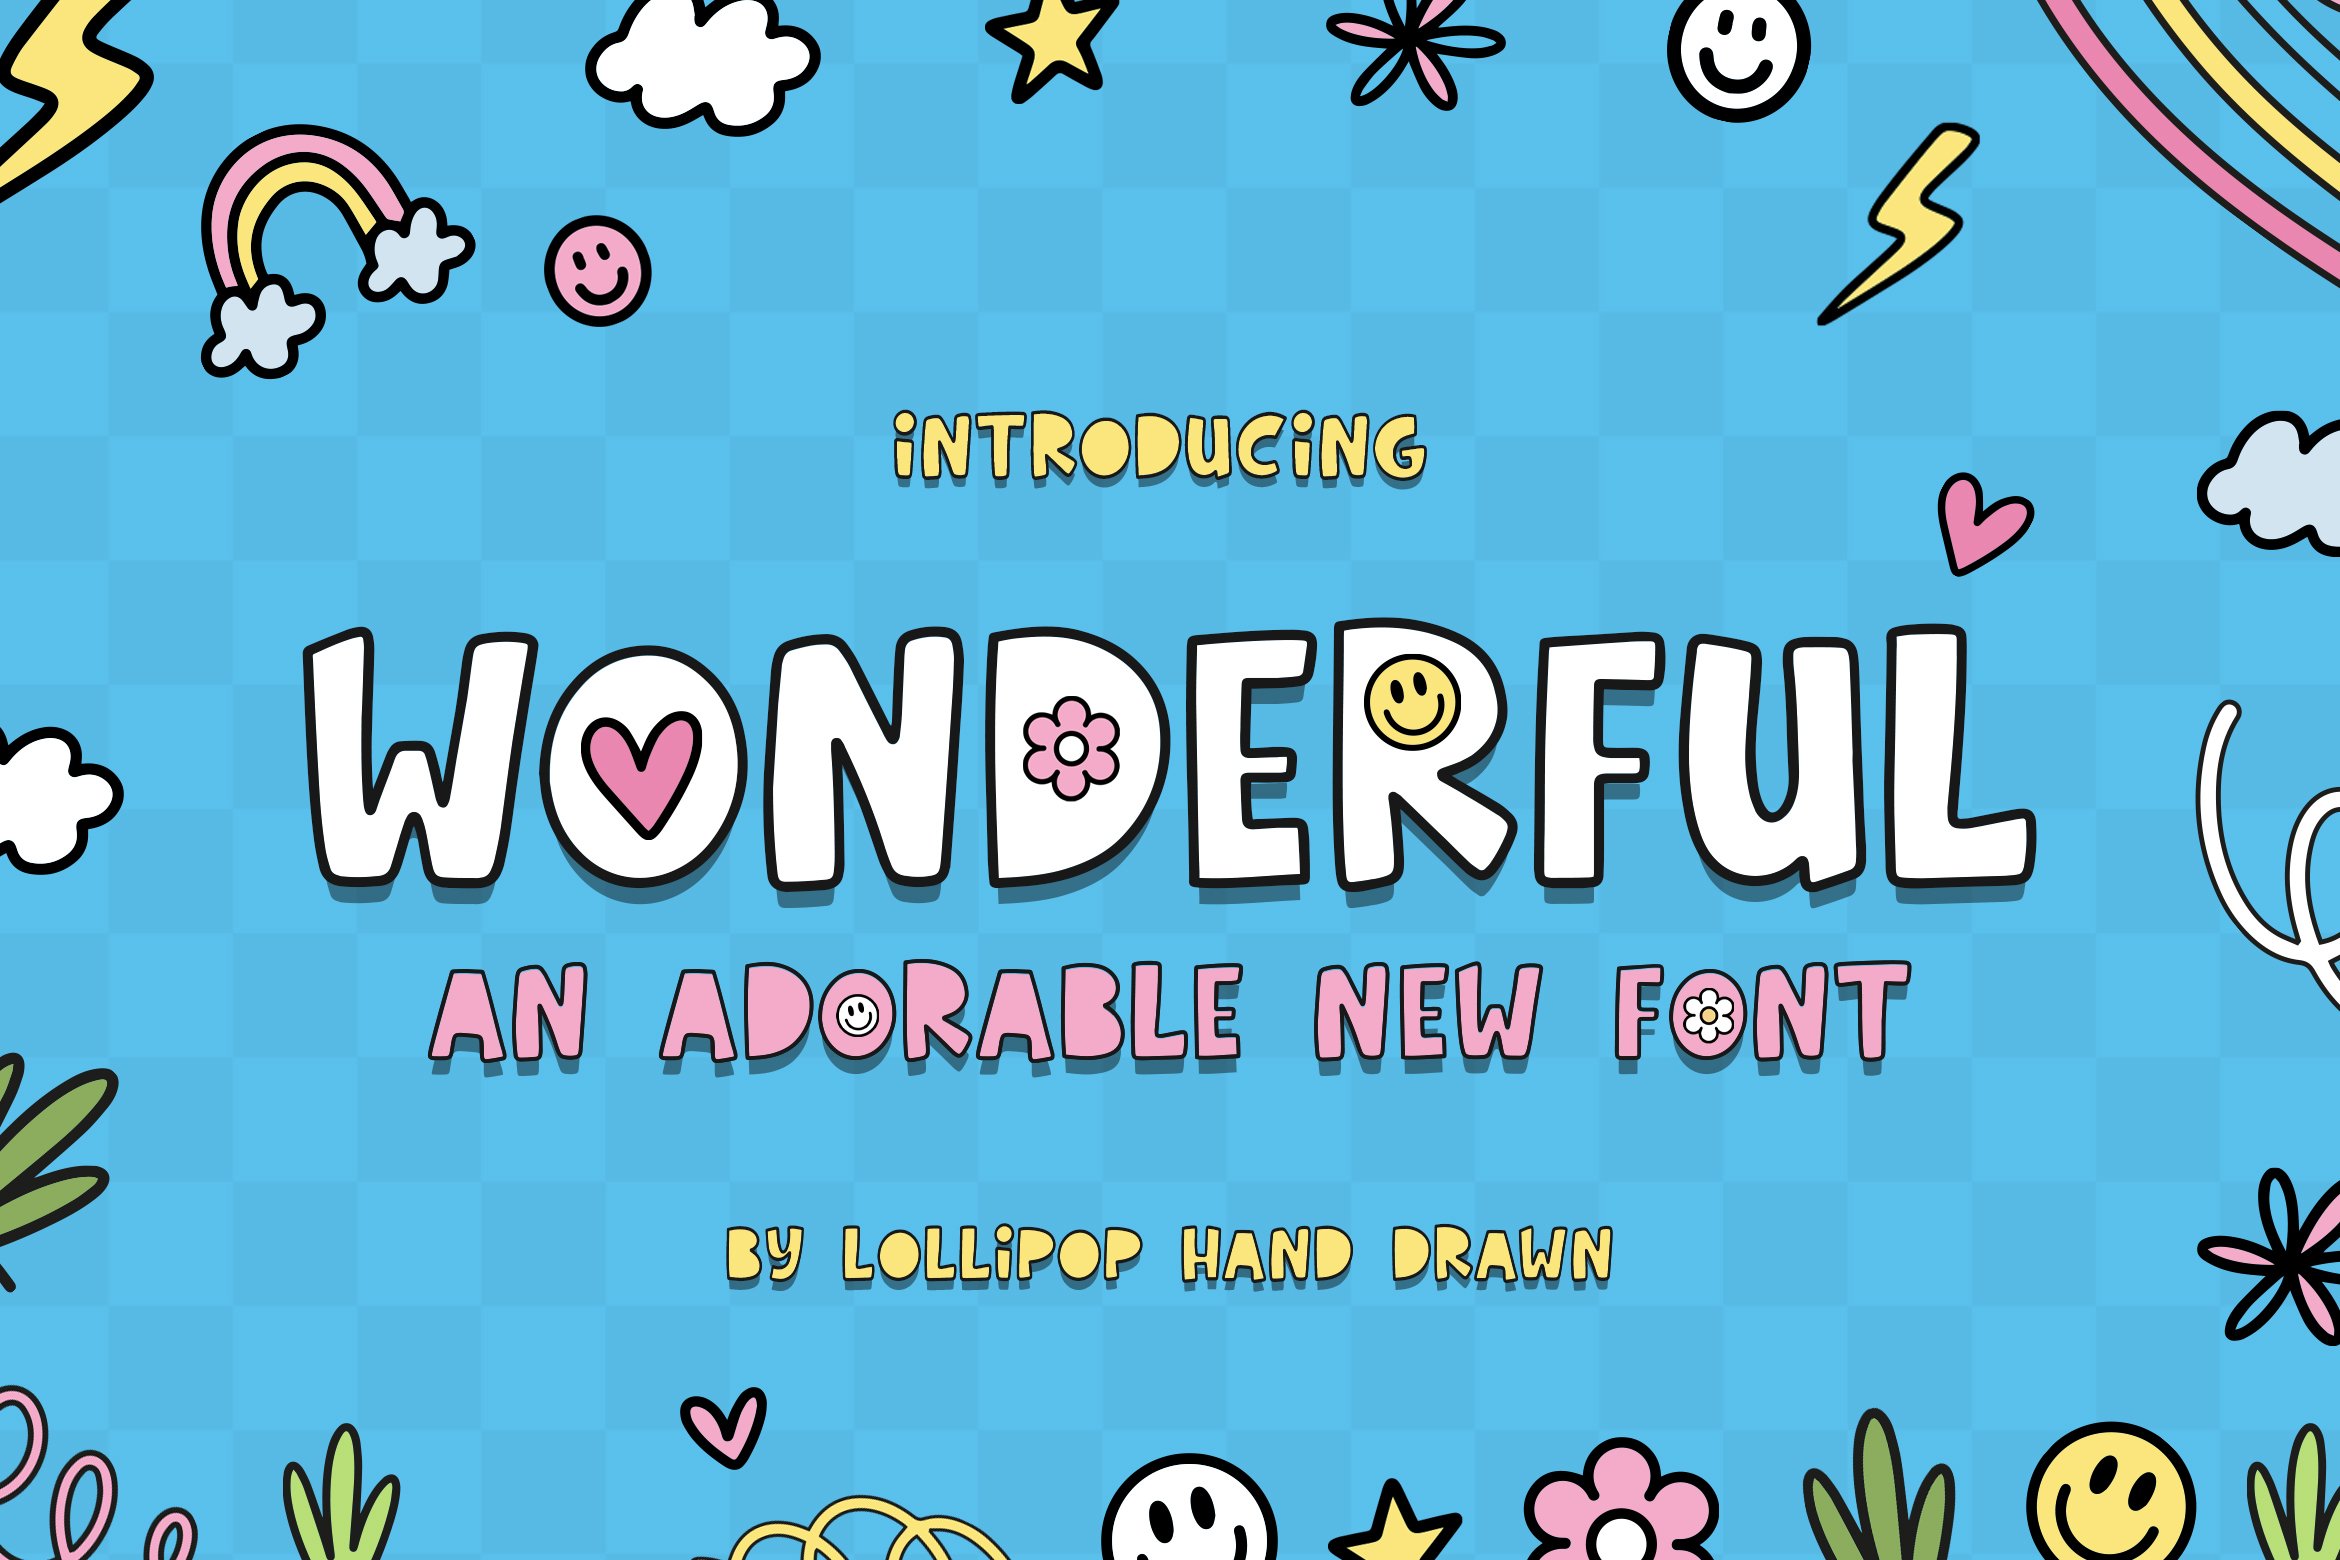 Wonderful Font Duo cover image.